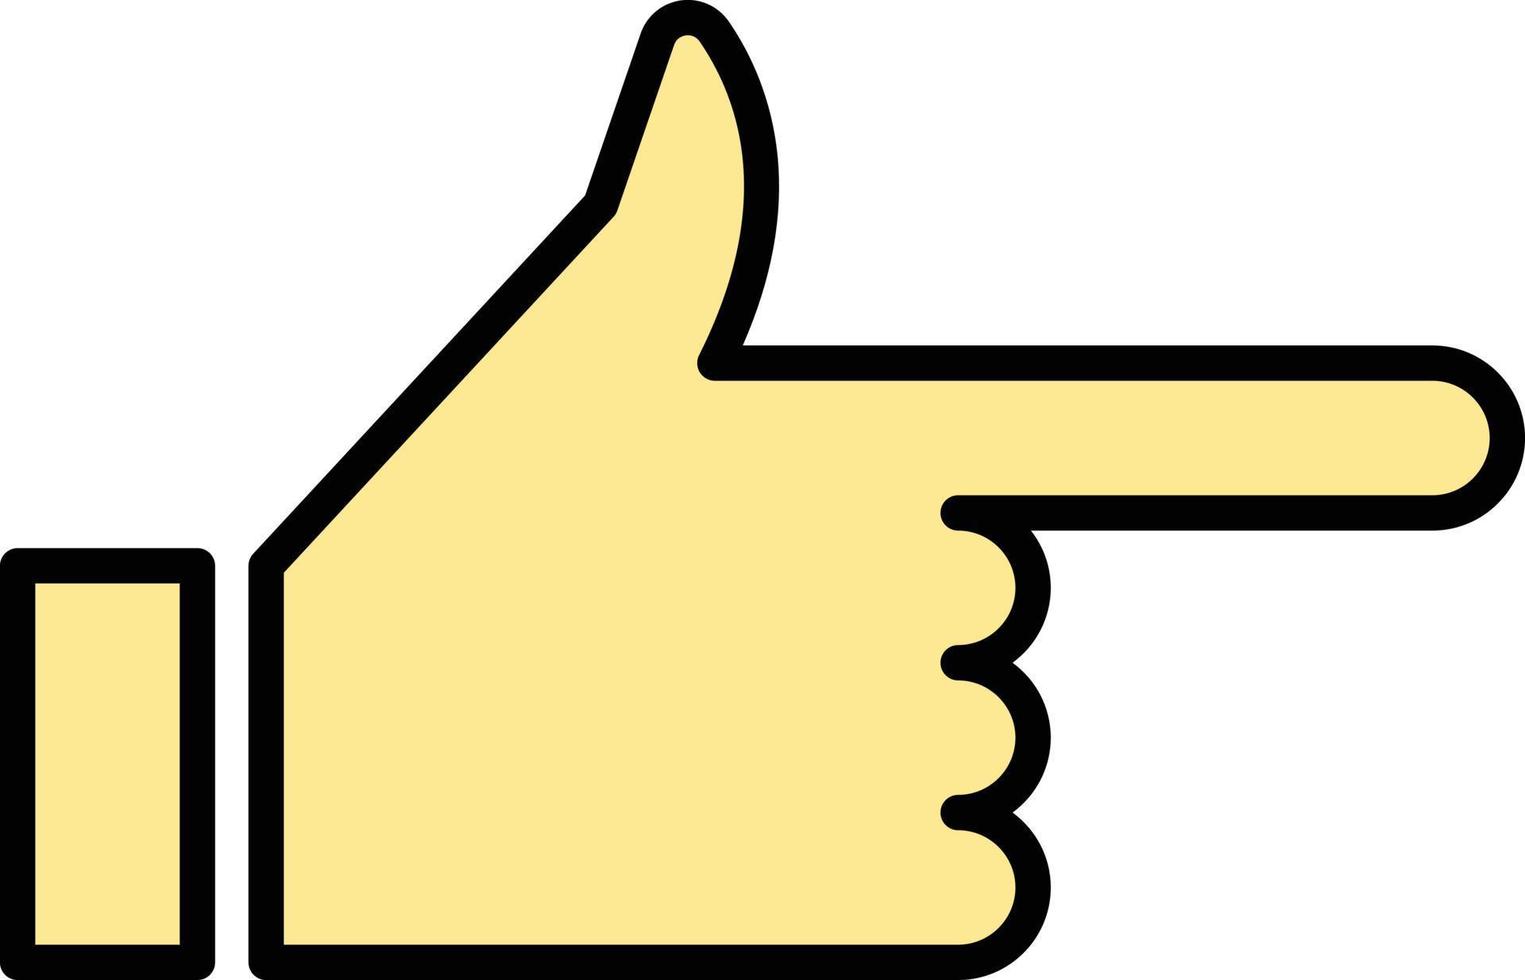 Index finger pointing flat vector icon. Pointer finger simple icon